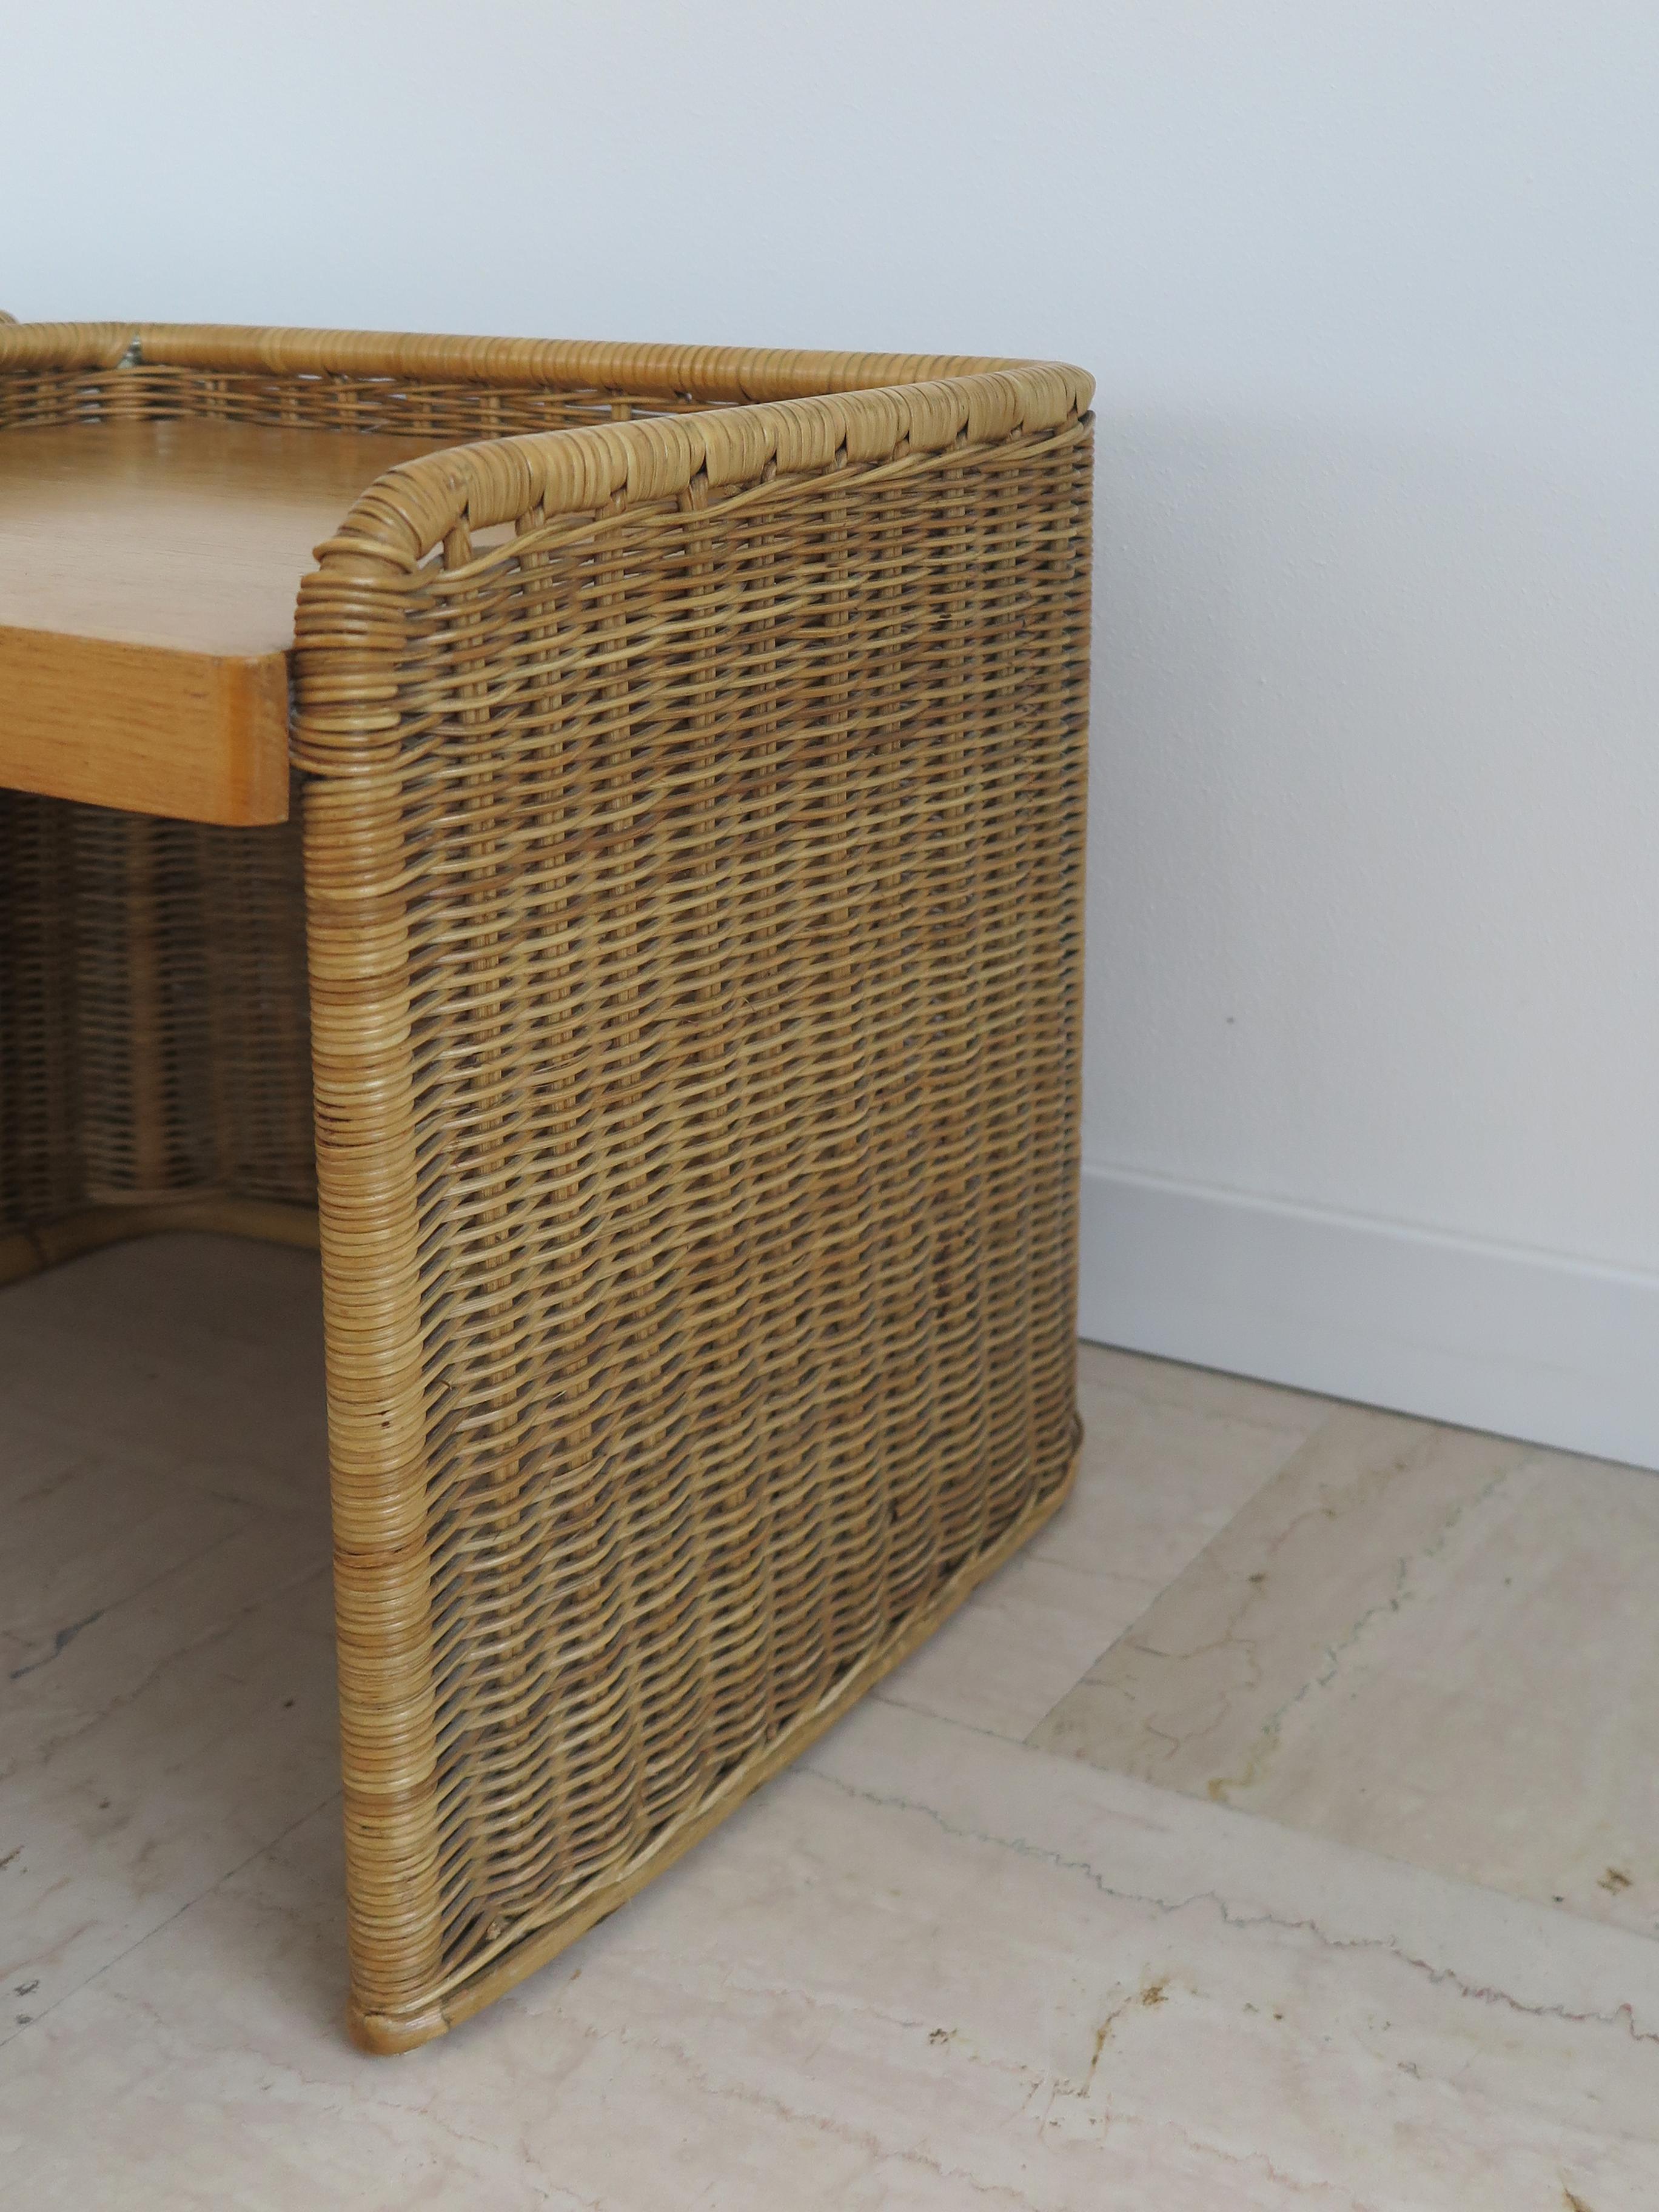 Italian Midcentury Rattan Bamboo Bedside Tables Night Stands, 1950s For Sale 2